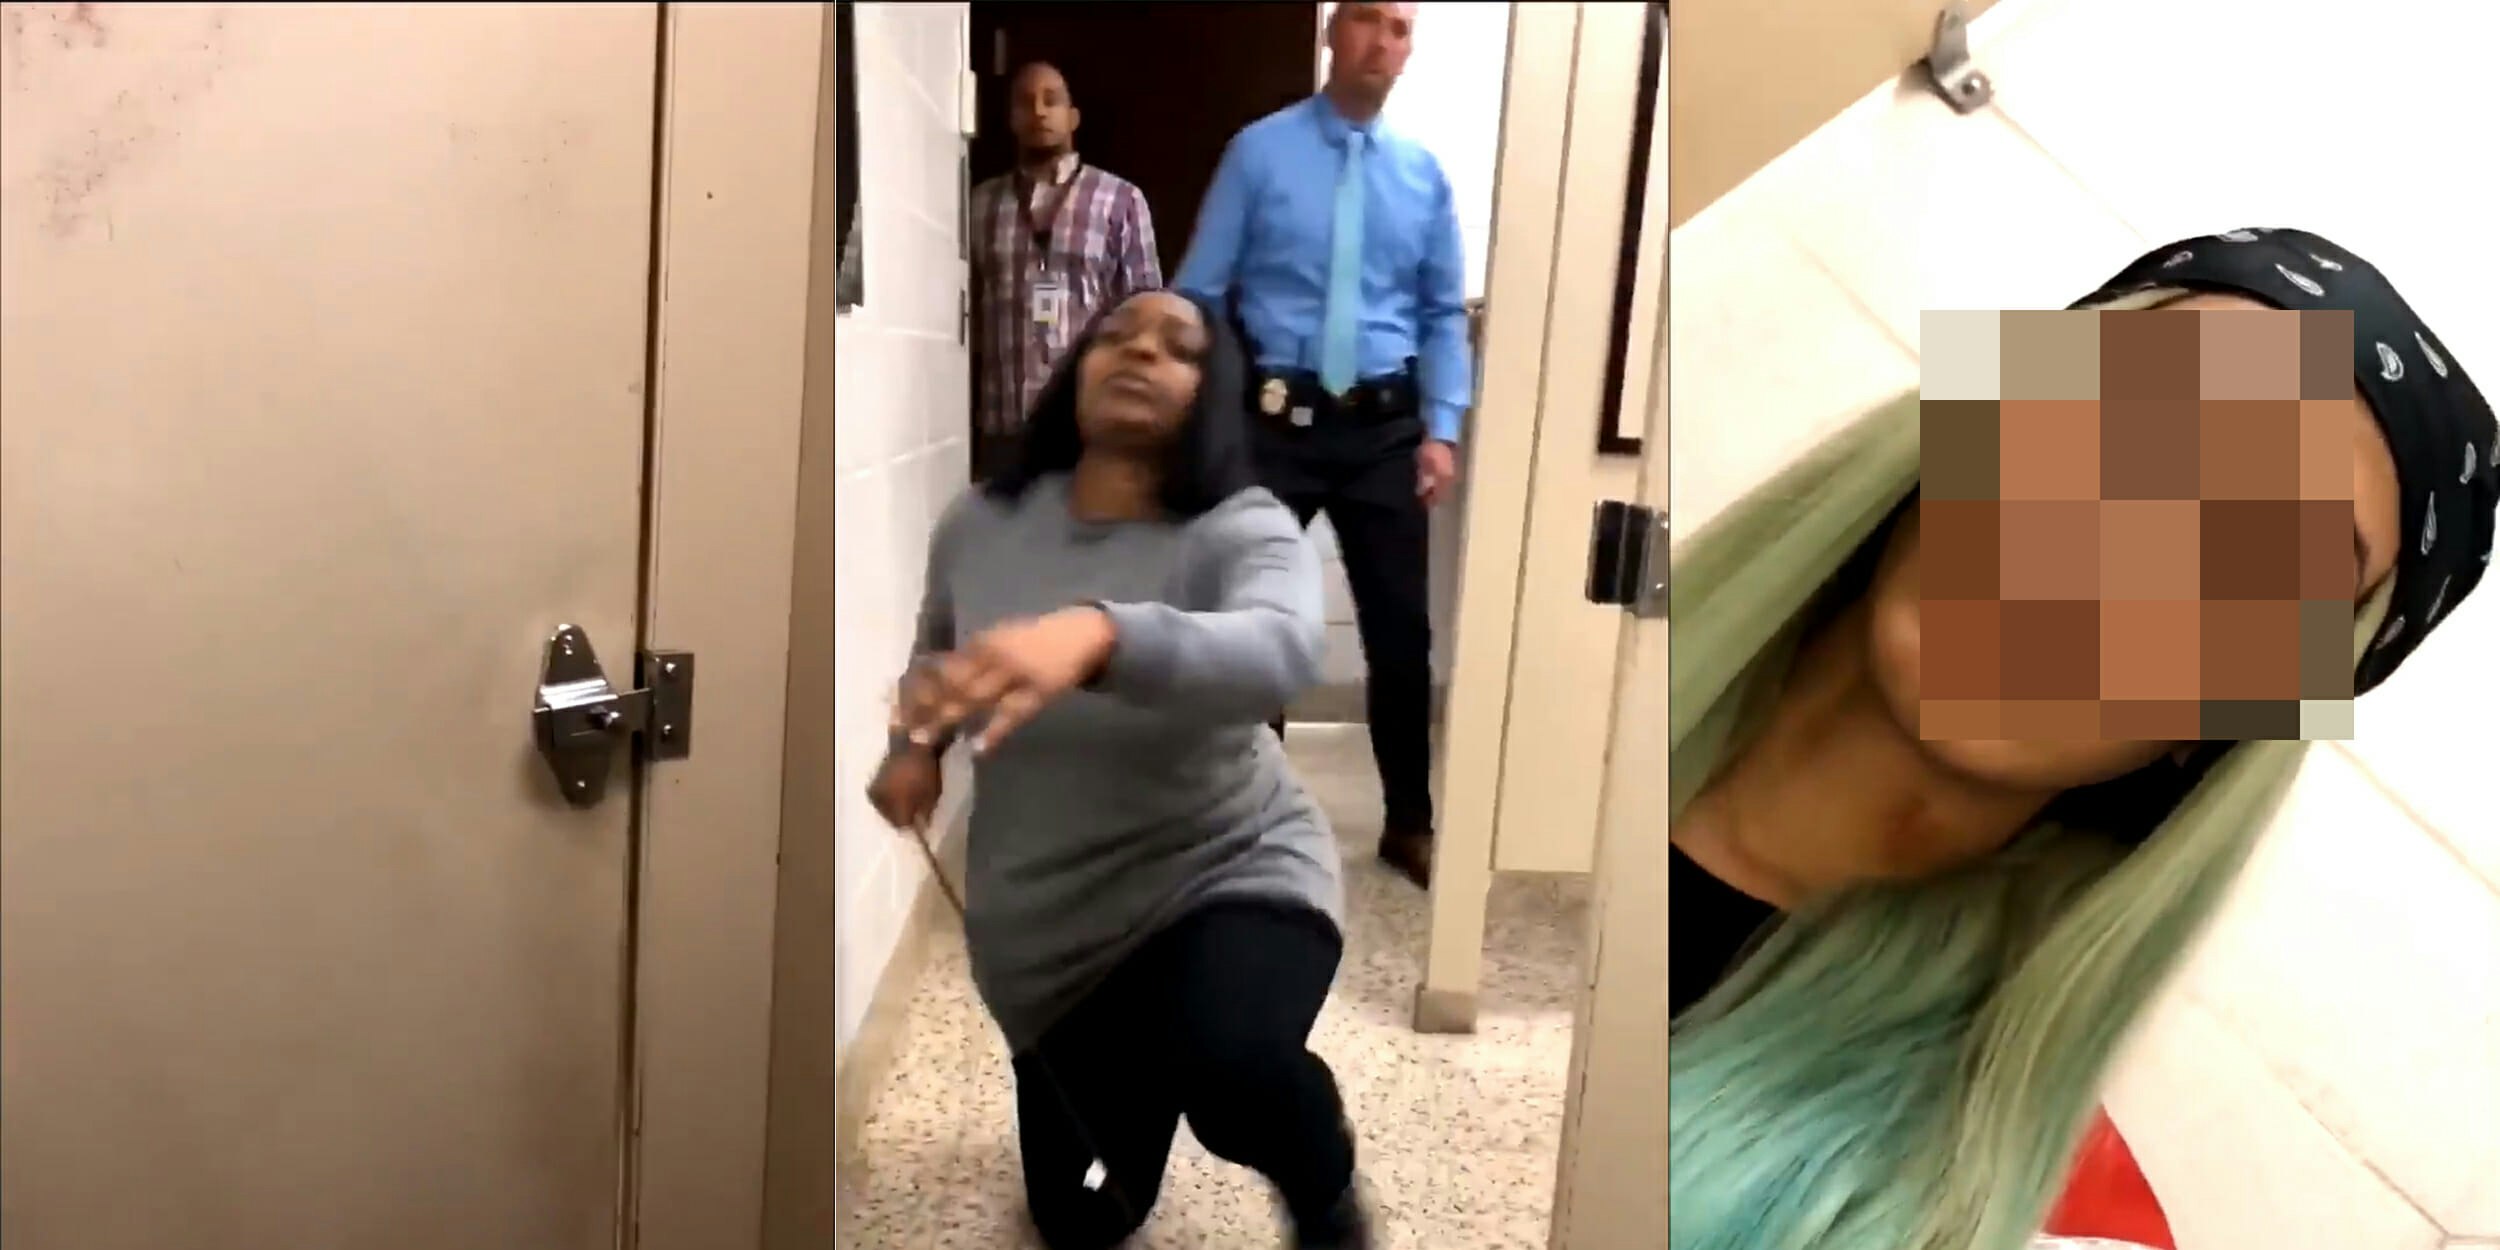 Student And Teacher Fucked In The Bathroom